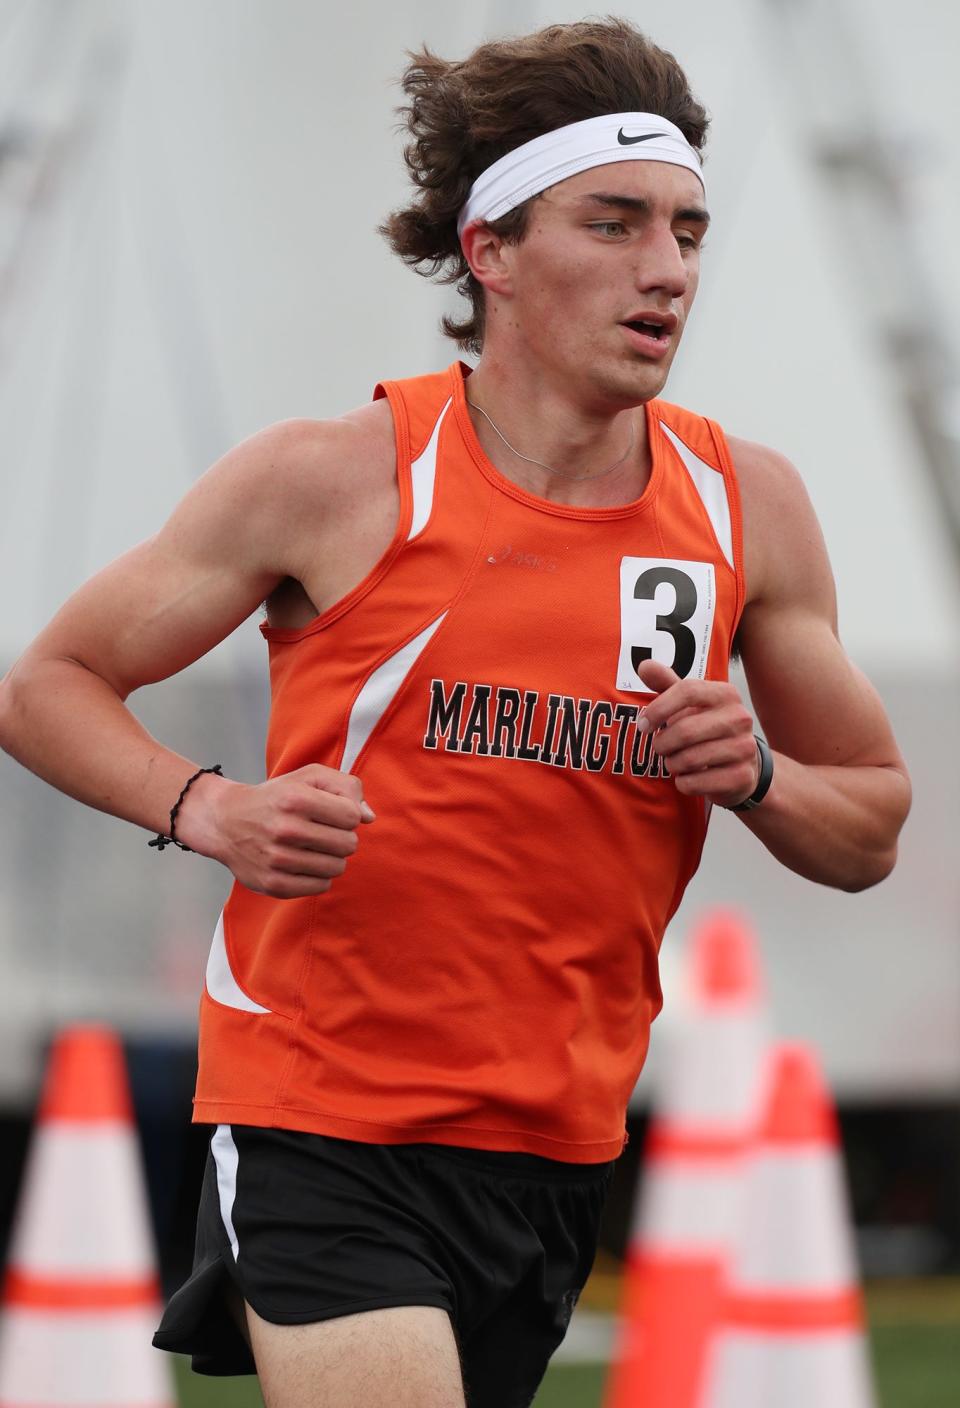 Marlington's Noah Graham wins the 3,200 meters in the Division II regional meet at Austintown Fitch High School on Saturday, May 28, 2022.